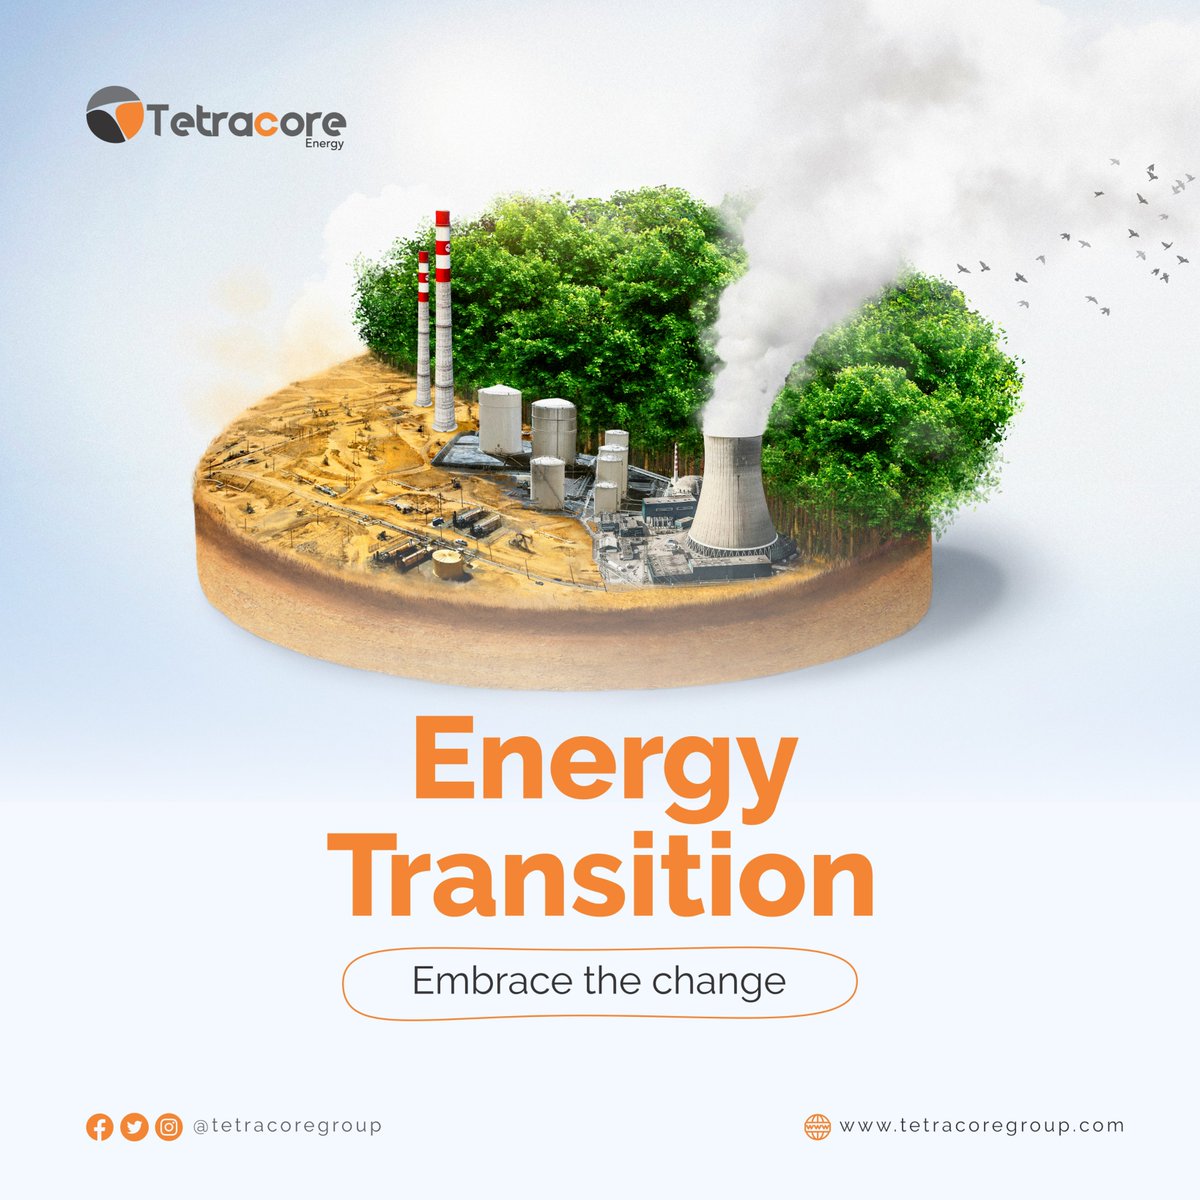 In a society like Nigeria, where power challenges are unending, embracing renewable energy is the key to a brighter future.
Embrace the change and join the movement towards a greener and more resilient future. #RenewableEnergy #PoweringNigeria #EmbraceTheChange  #EnergyTransition